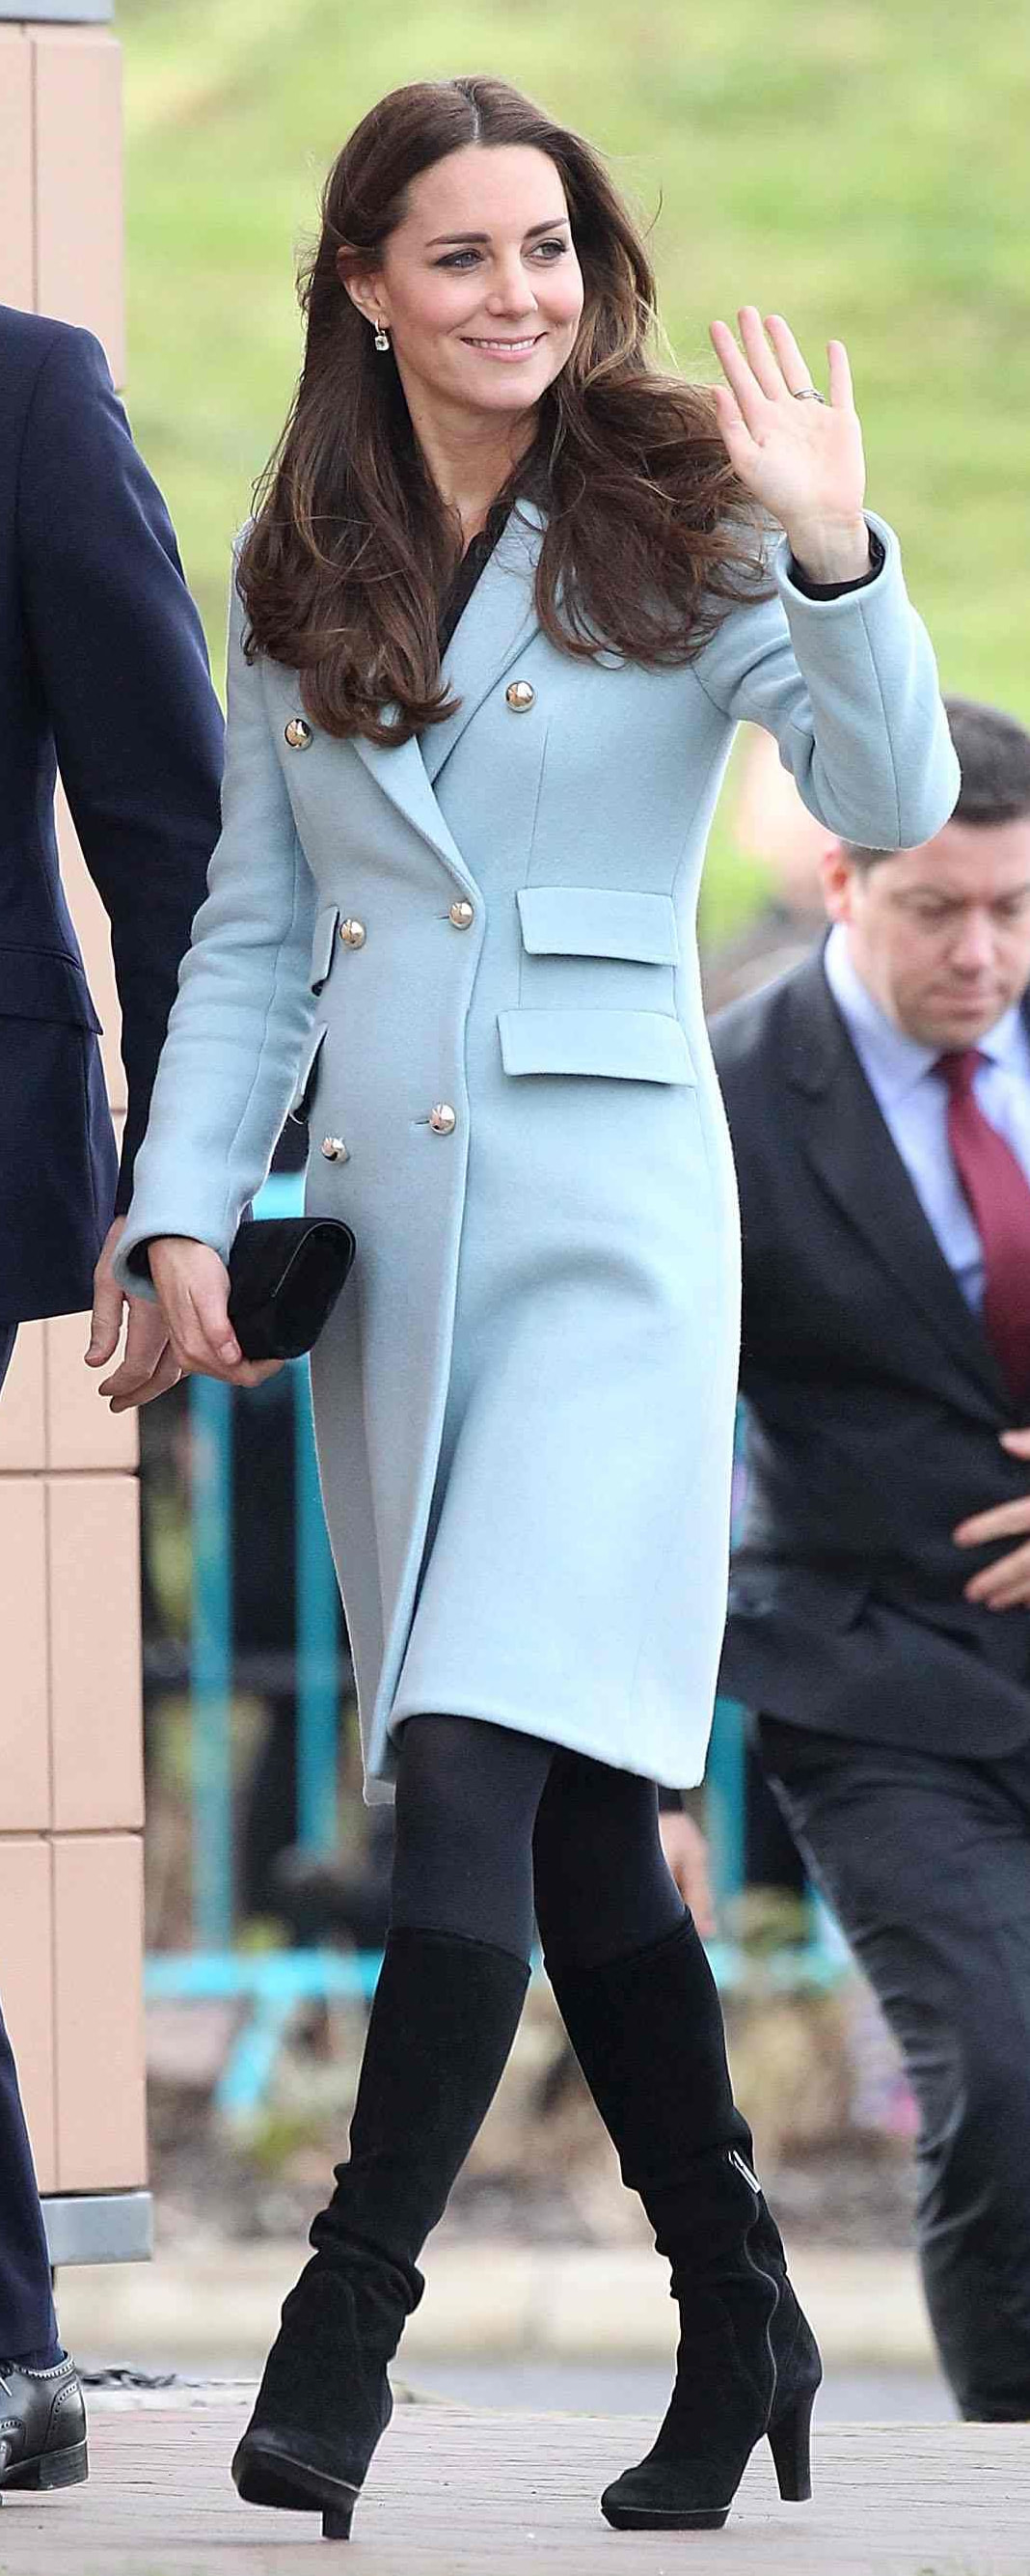 Matthew Williamson Baby Blue Double Breasted Wool-Blend Coat as seen on Kate Middleton, The Duchess of Cambridge.